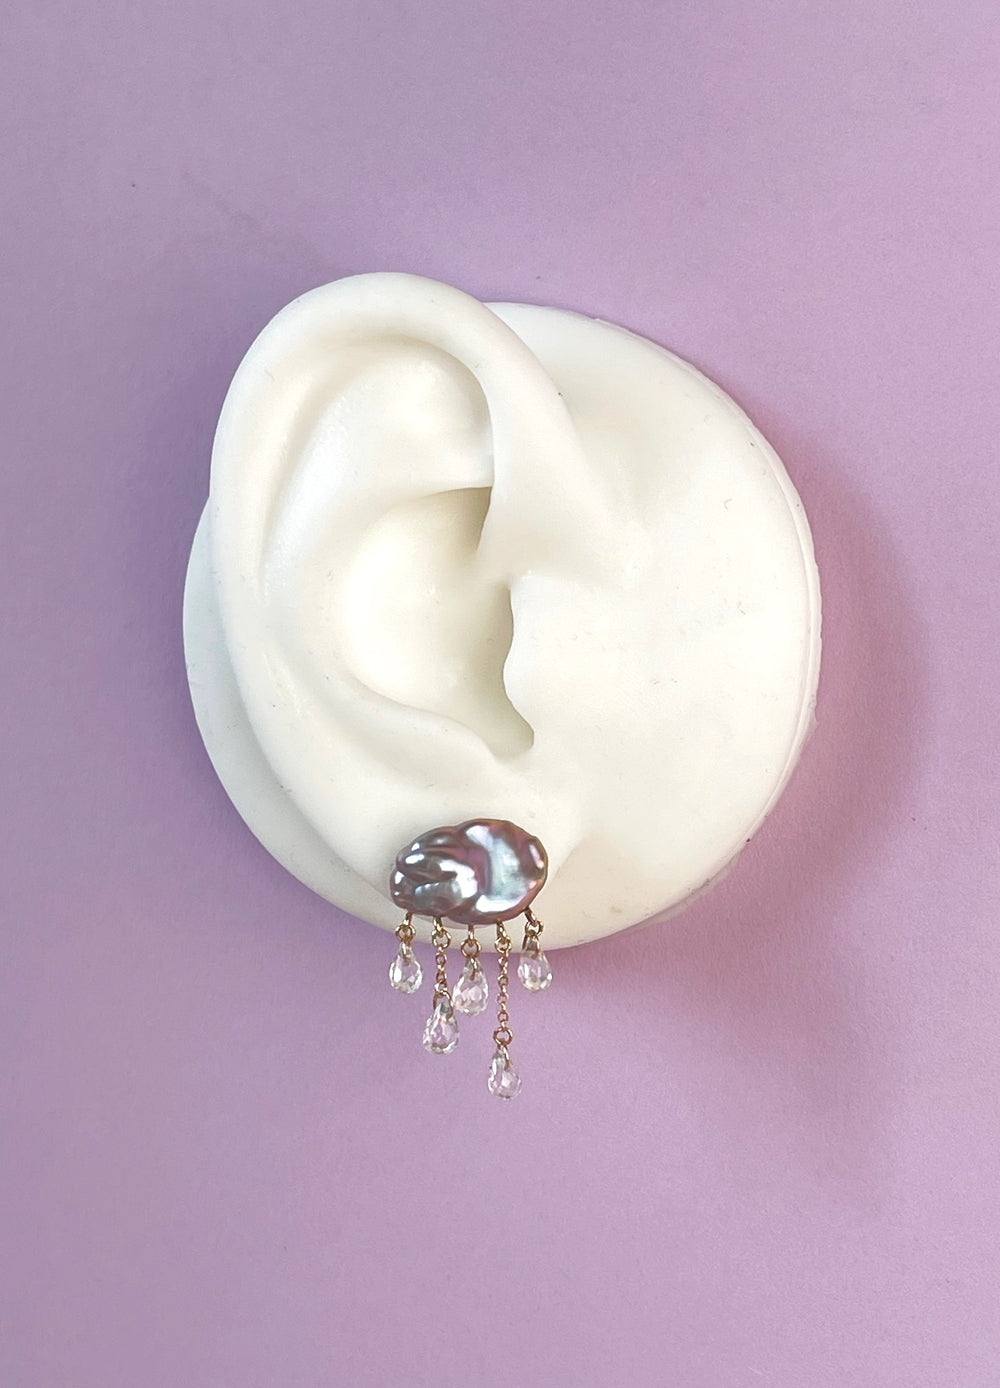 white ear shape one purple background with grey cloud-shaped pearl earring with 5 raindrops dangling below